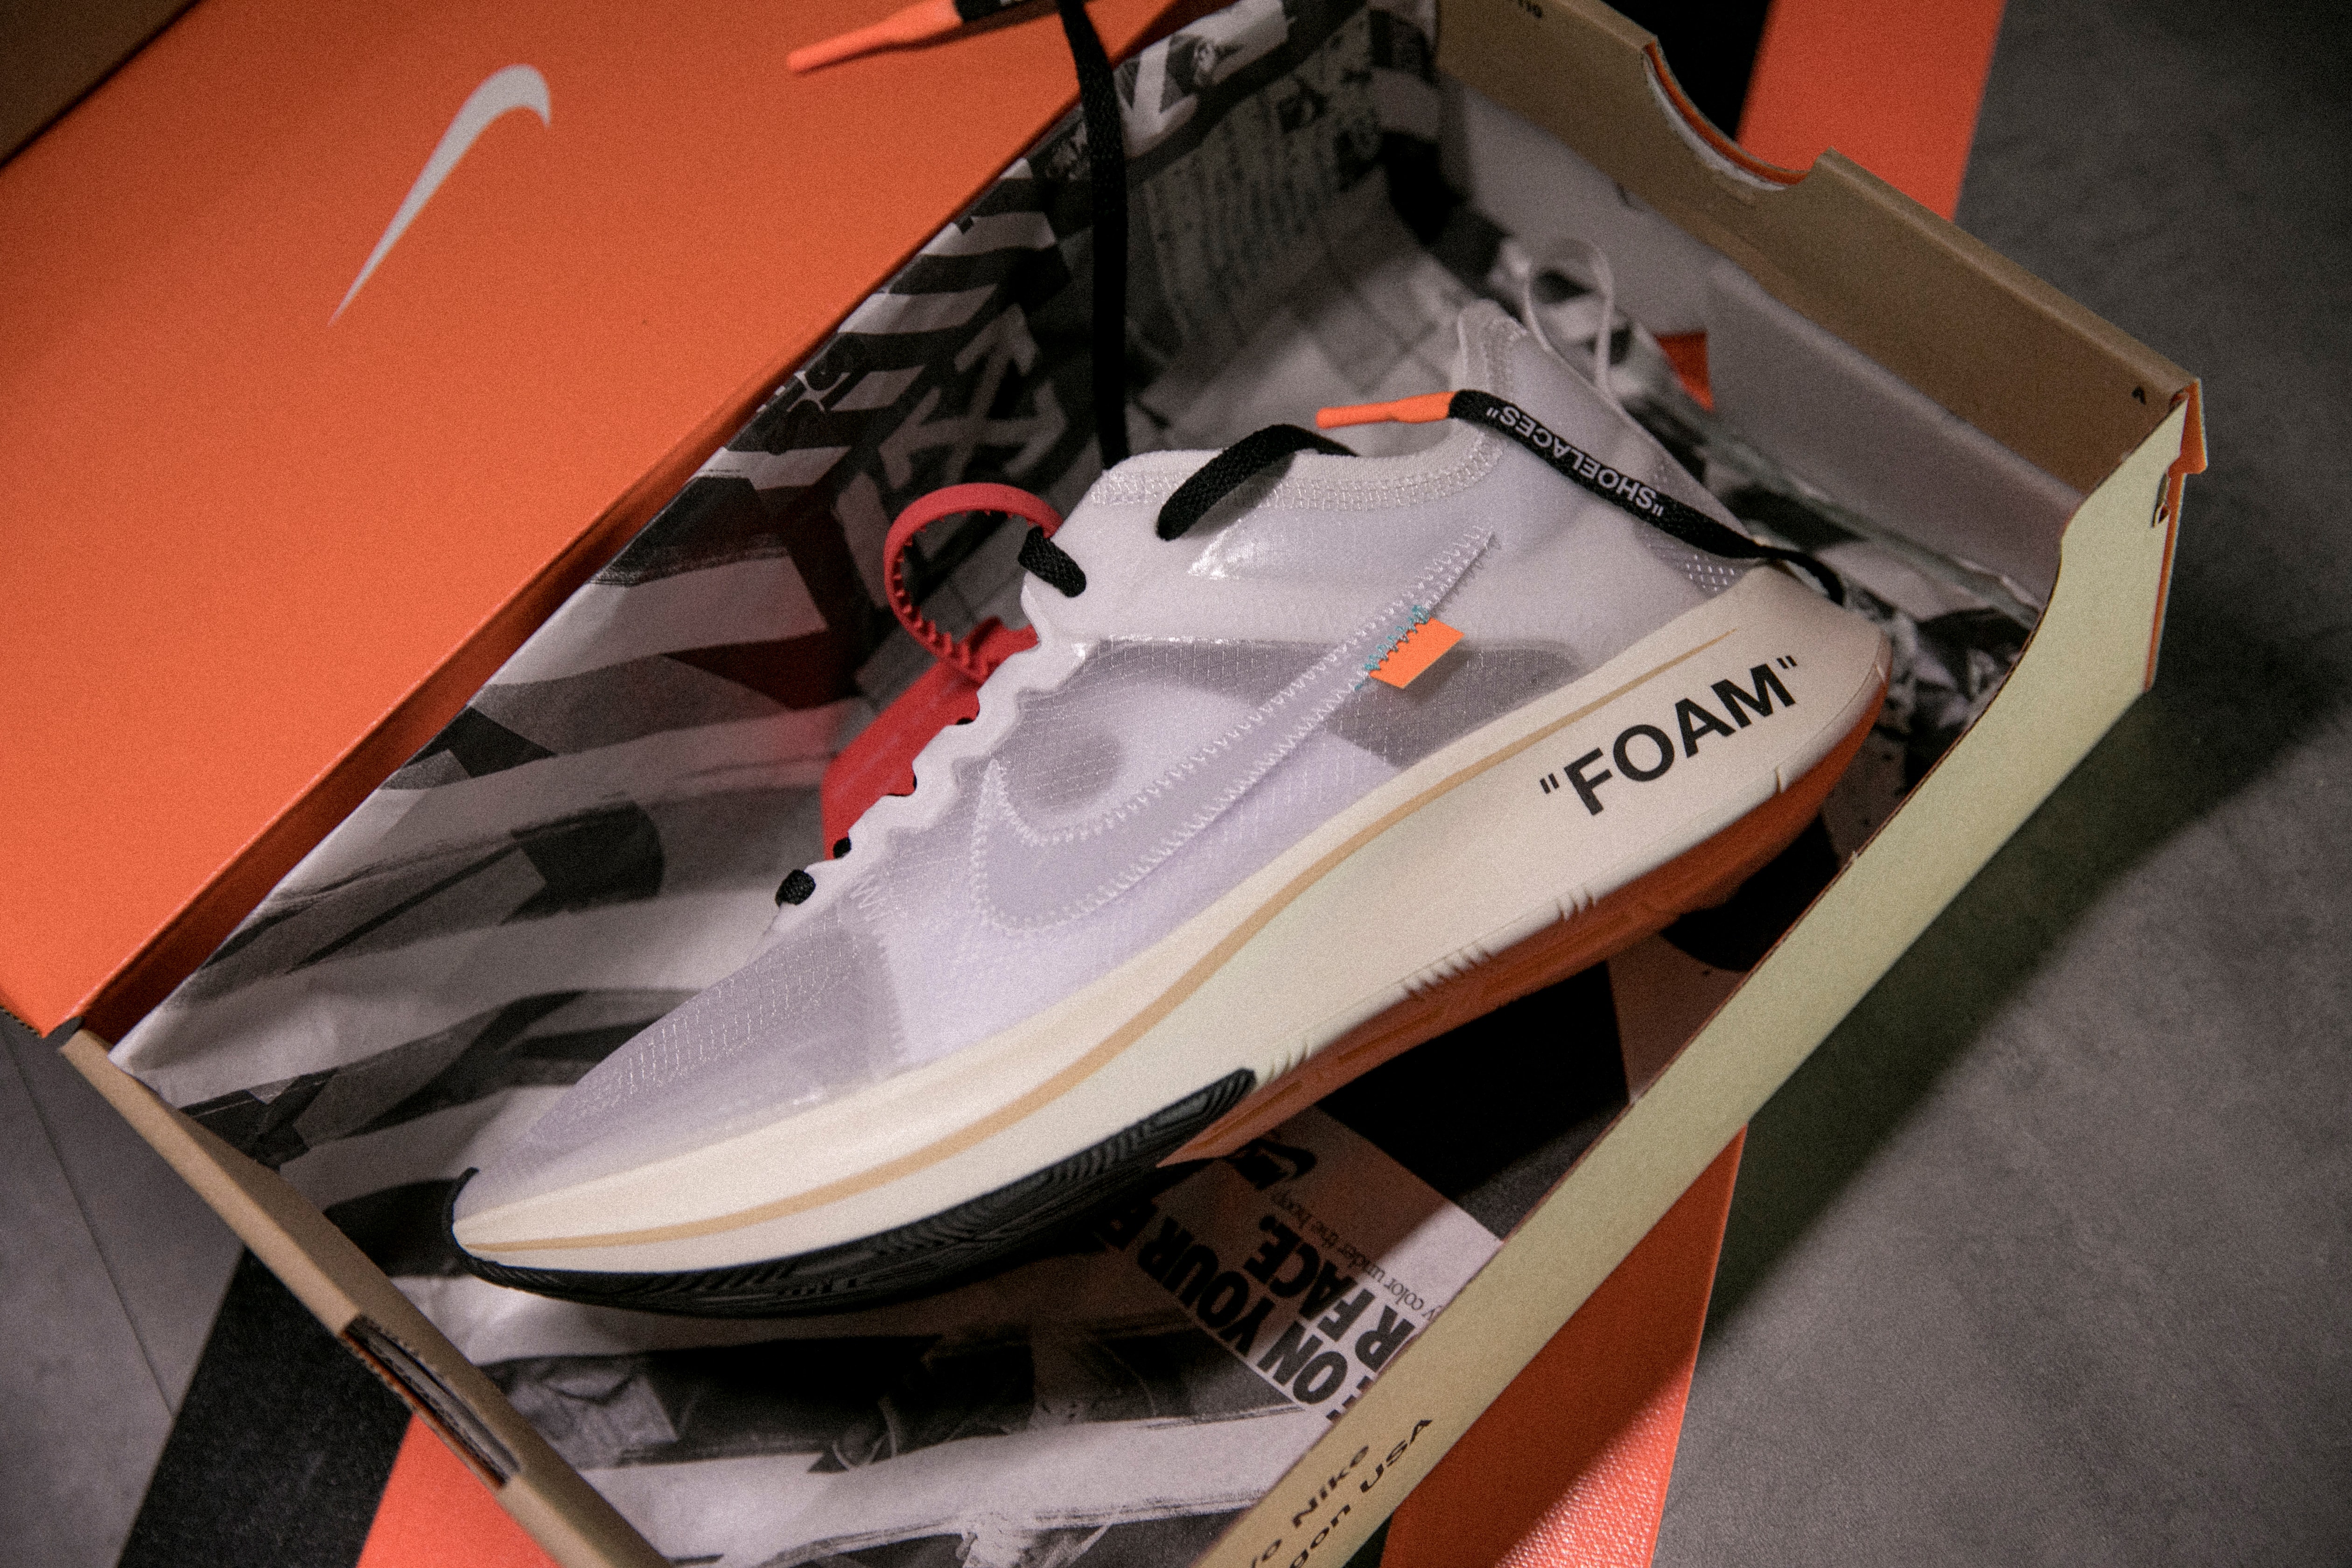 NIKE X VIRGIL ABLOH: TEN ICONS RECONSTRUCTED